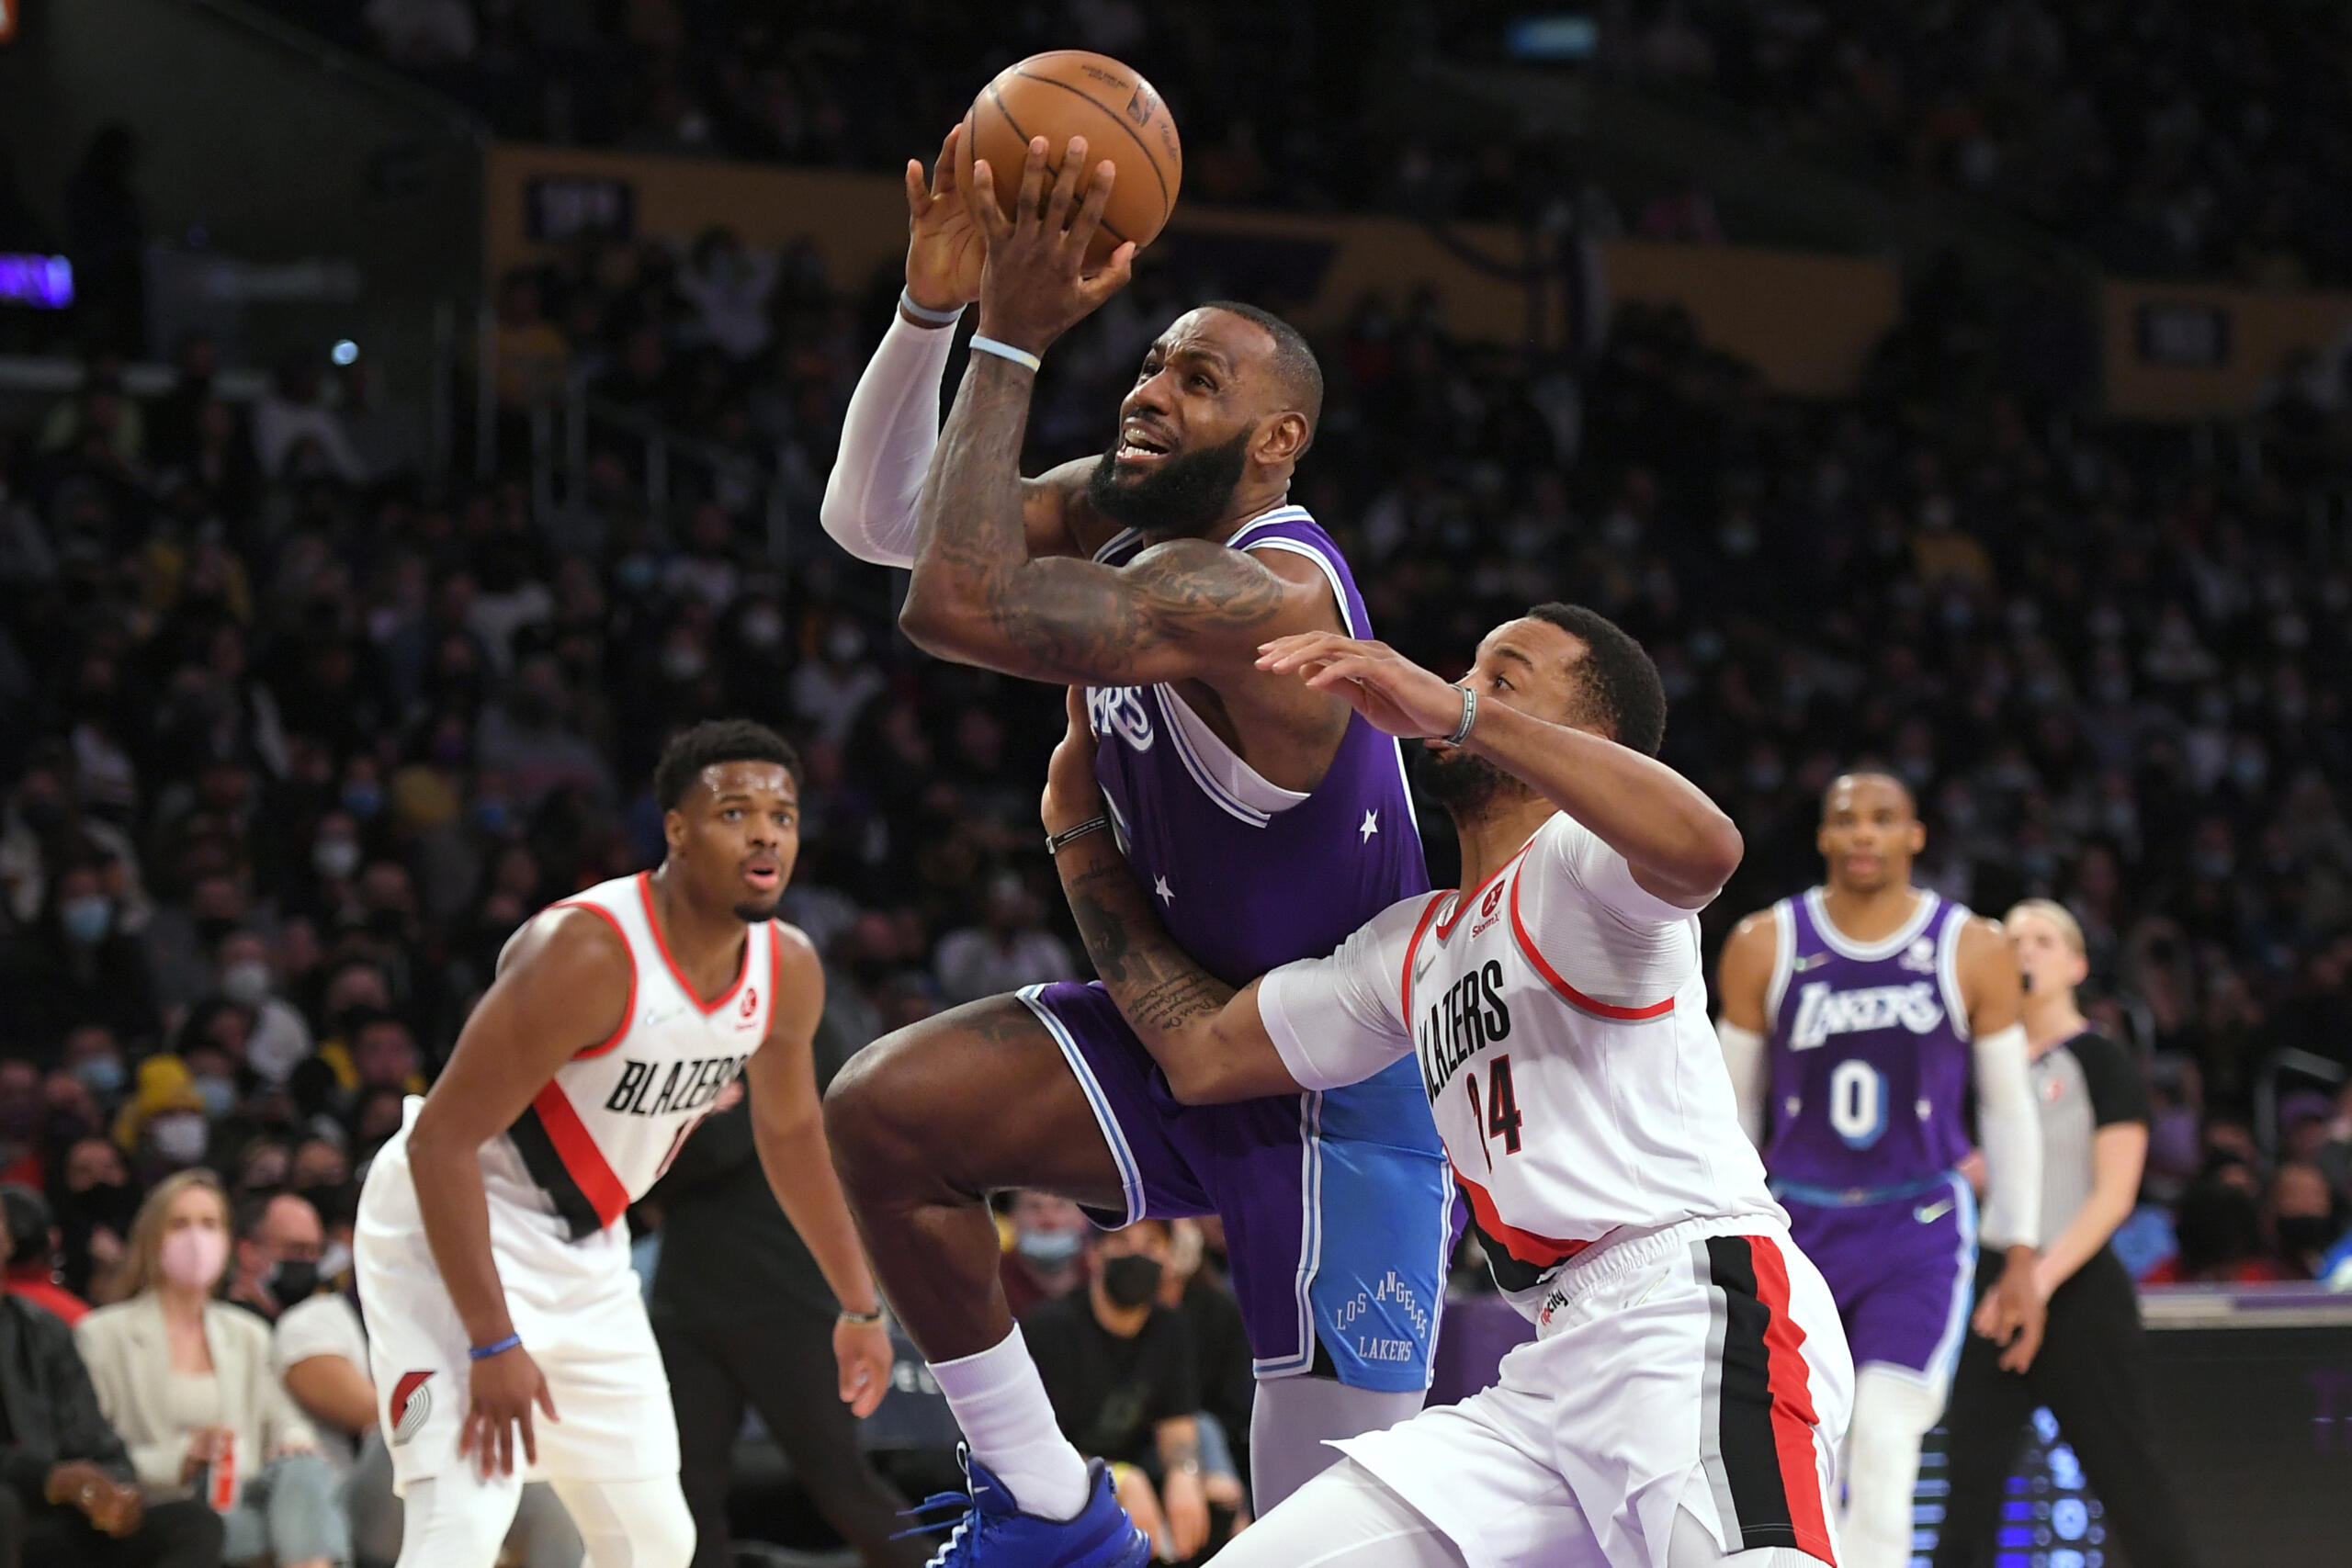 Los Angeles Lakers forward LeBron James (6) gets past Portland Trail Blazers forward Norman Powell (24) during the first half of an NBA basketball game Friday Dec. 31, 2021, in Los Angeles.